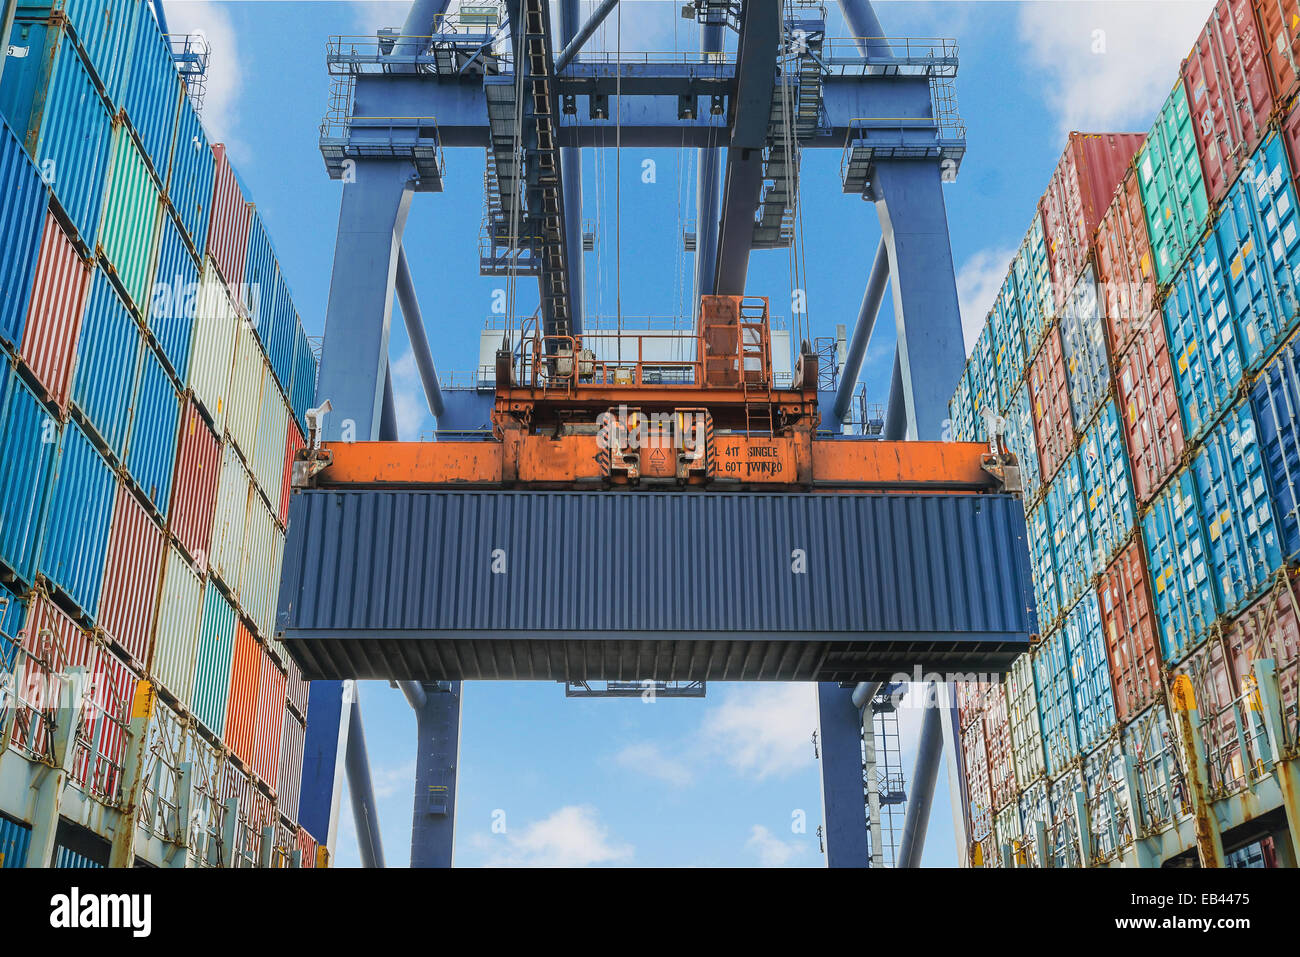 Shore crane lifts container during cargo operation in port Stock Photo